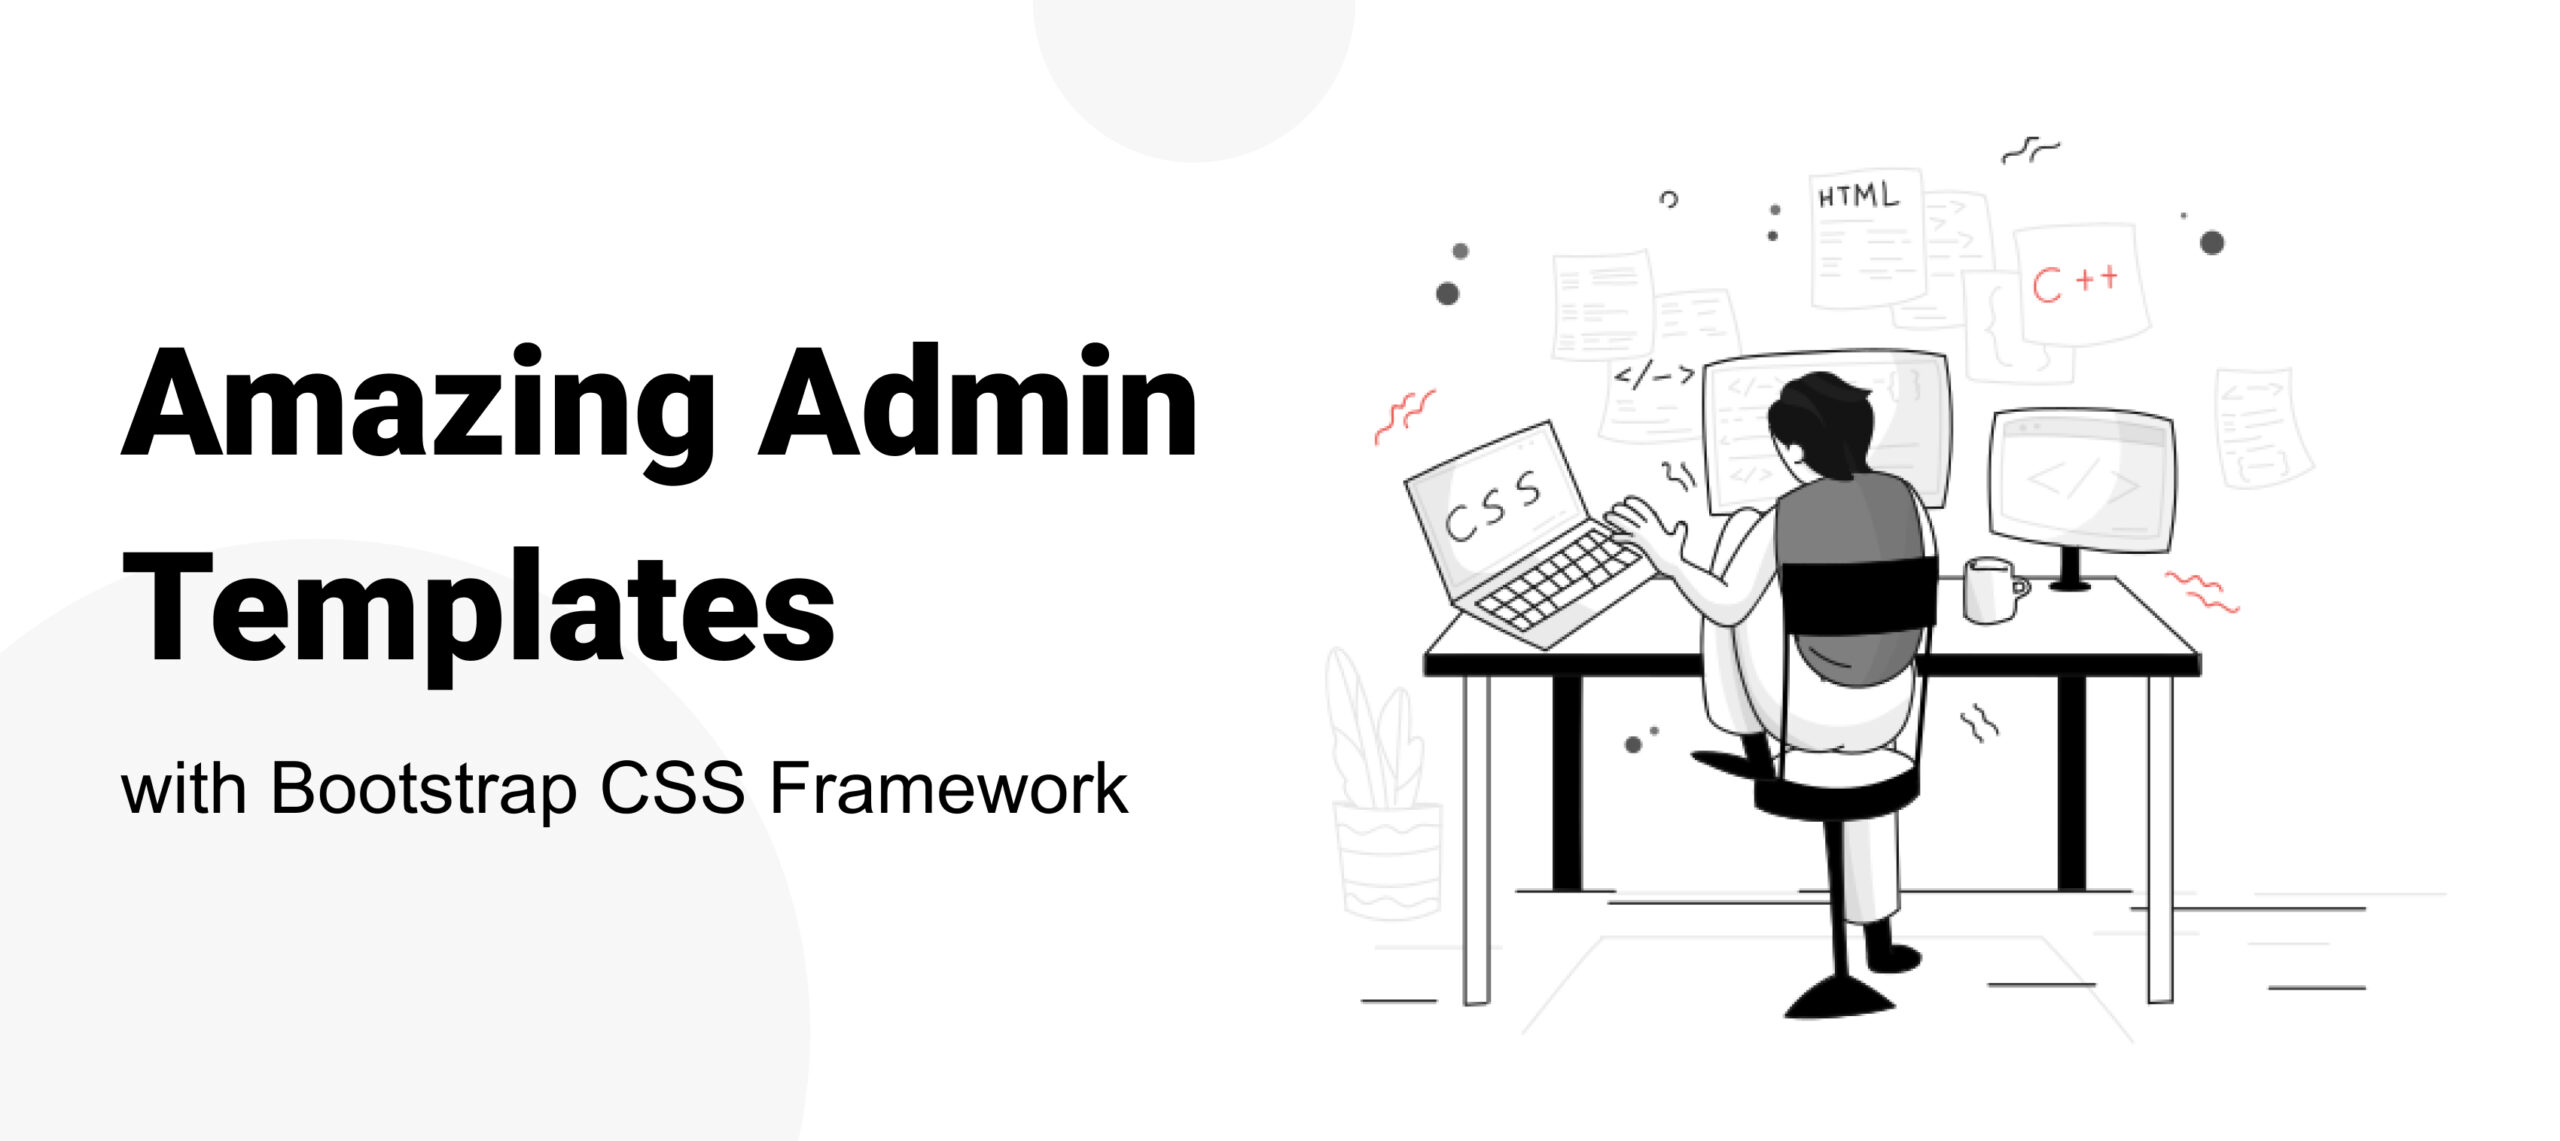  Amazing Admin Templates with Bootstrap CSS Framework